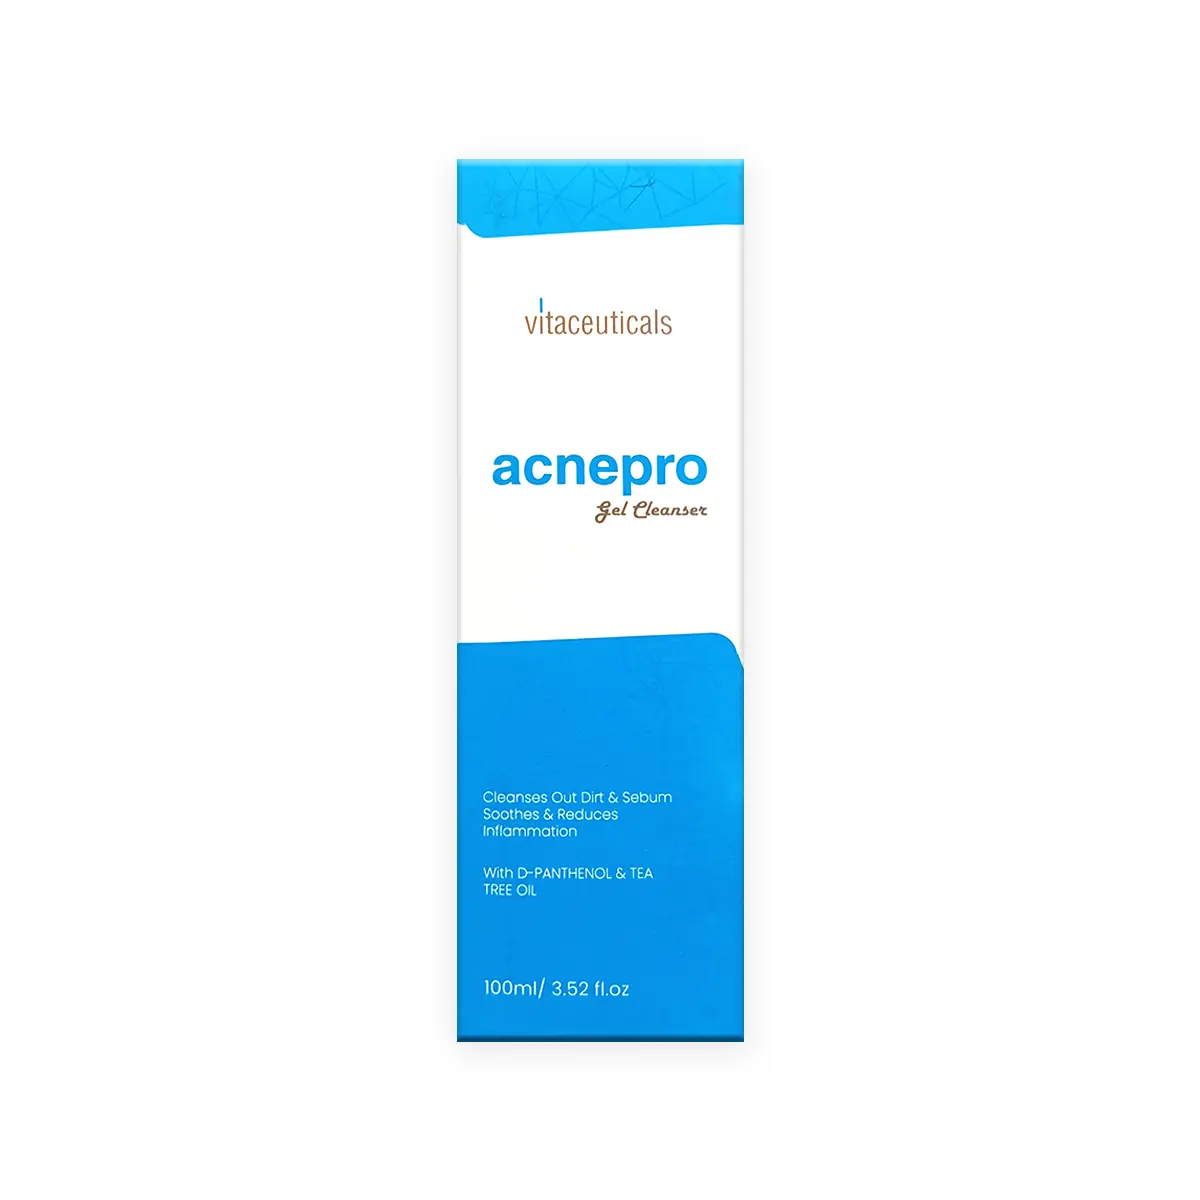 First product image of Vitaceuticals Acnepro Gel Cleancer 100ml